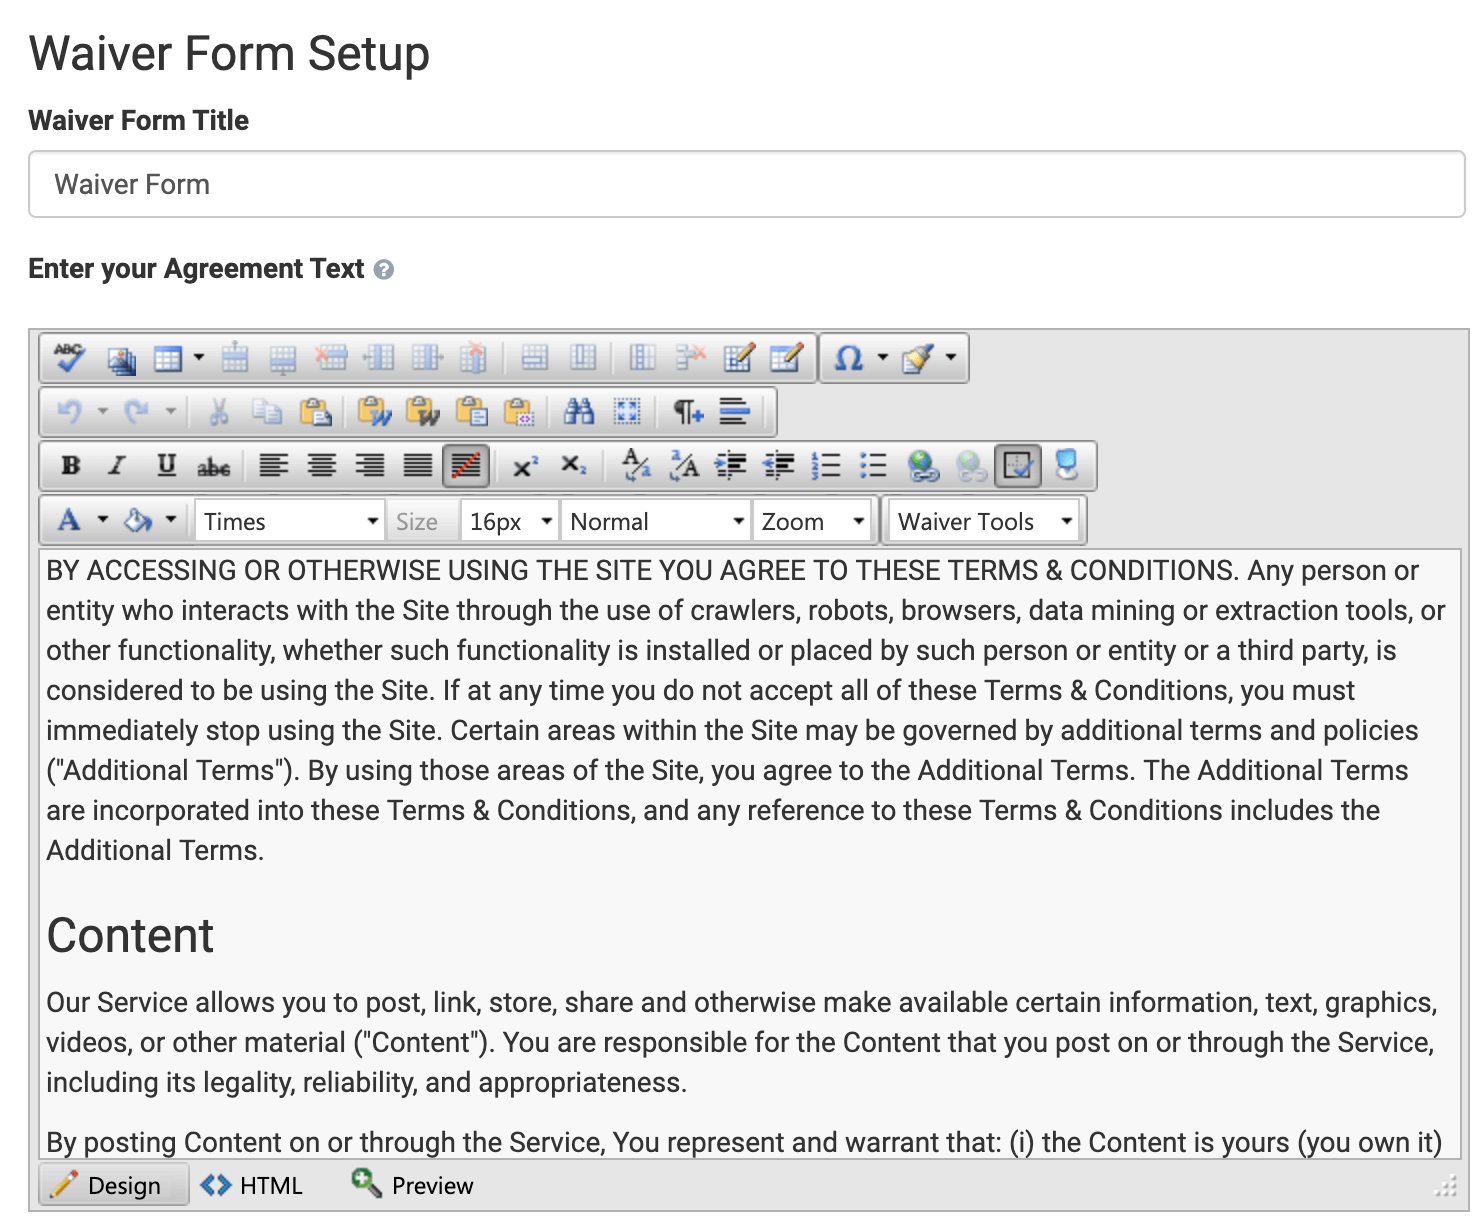 Waiver Form Editor